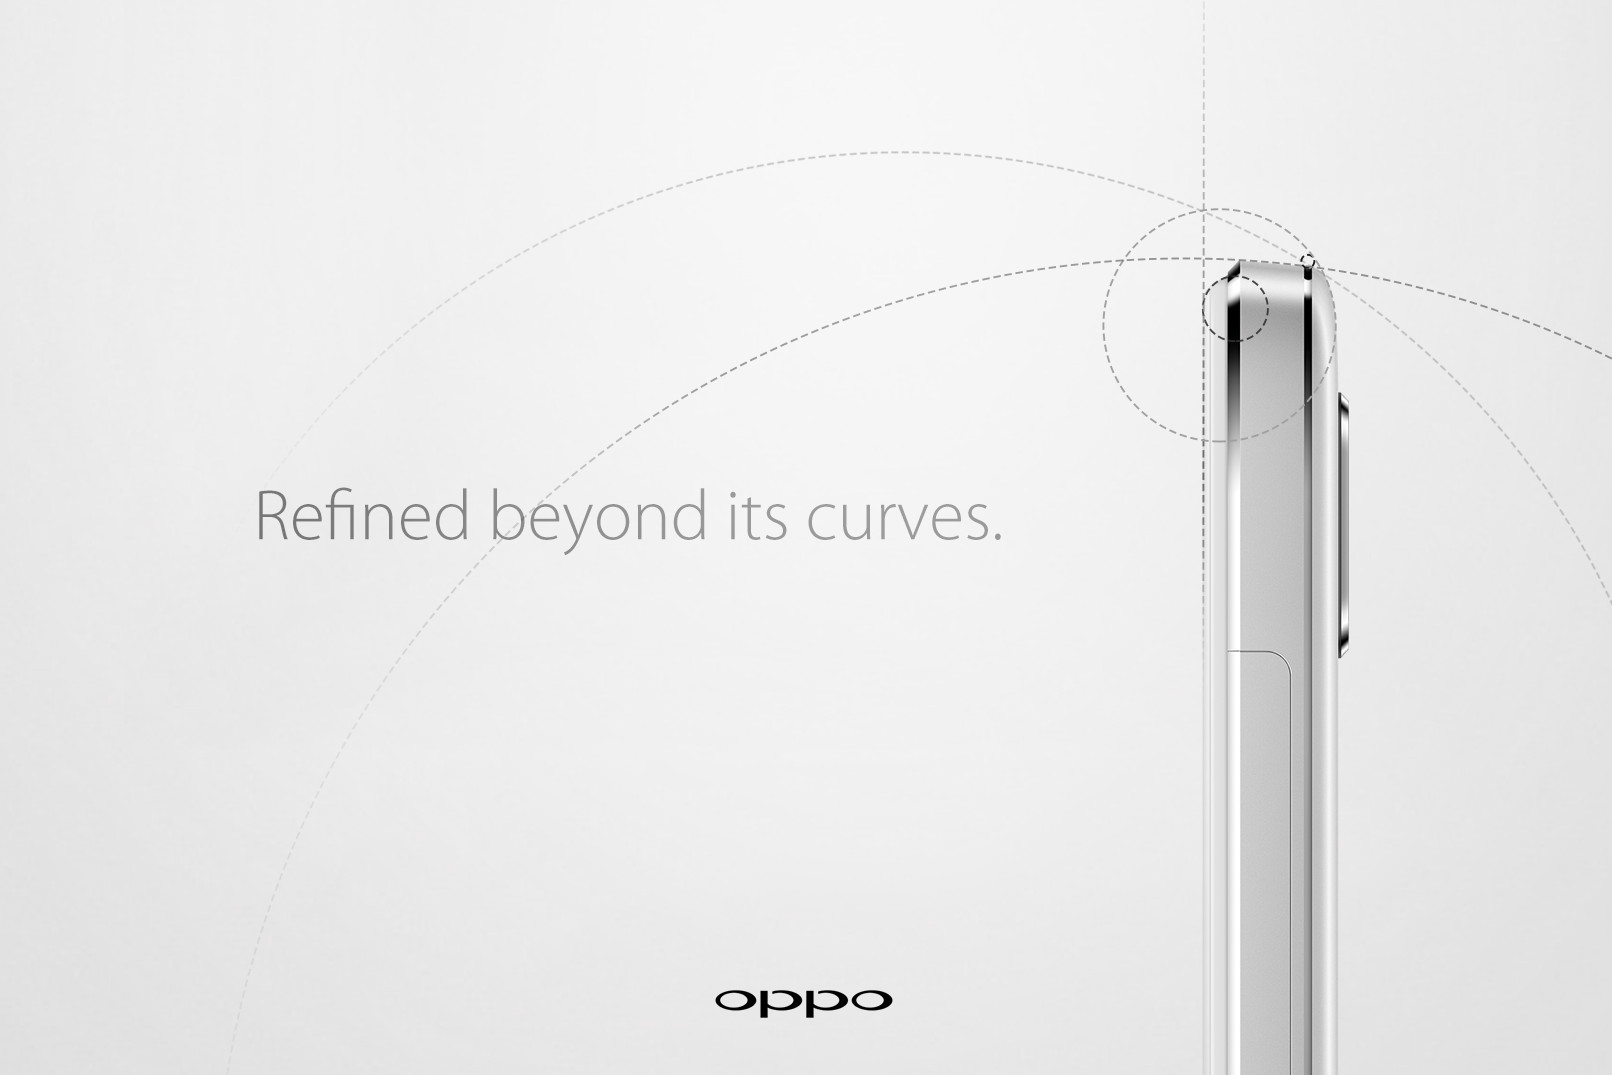 The OPPO R7 with Mental Design